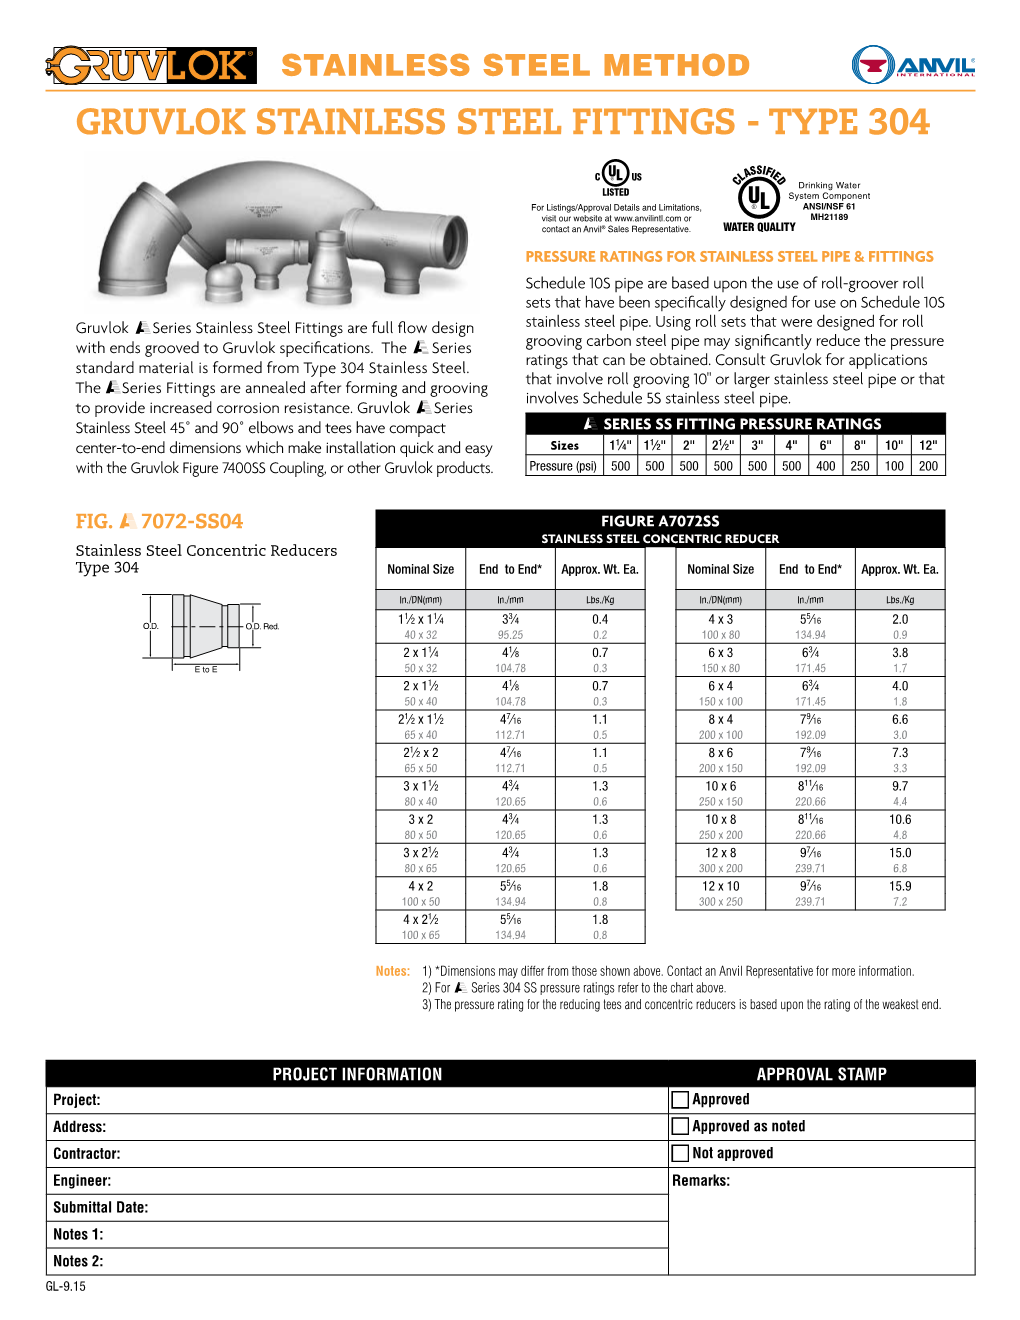 Gruvlok Stainless Steel Fittings - Type 304